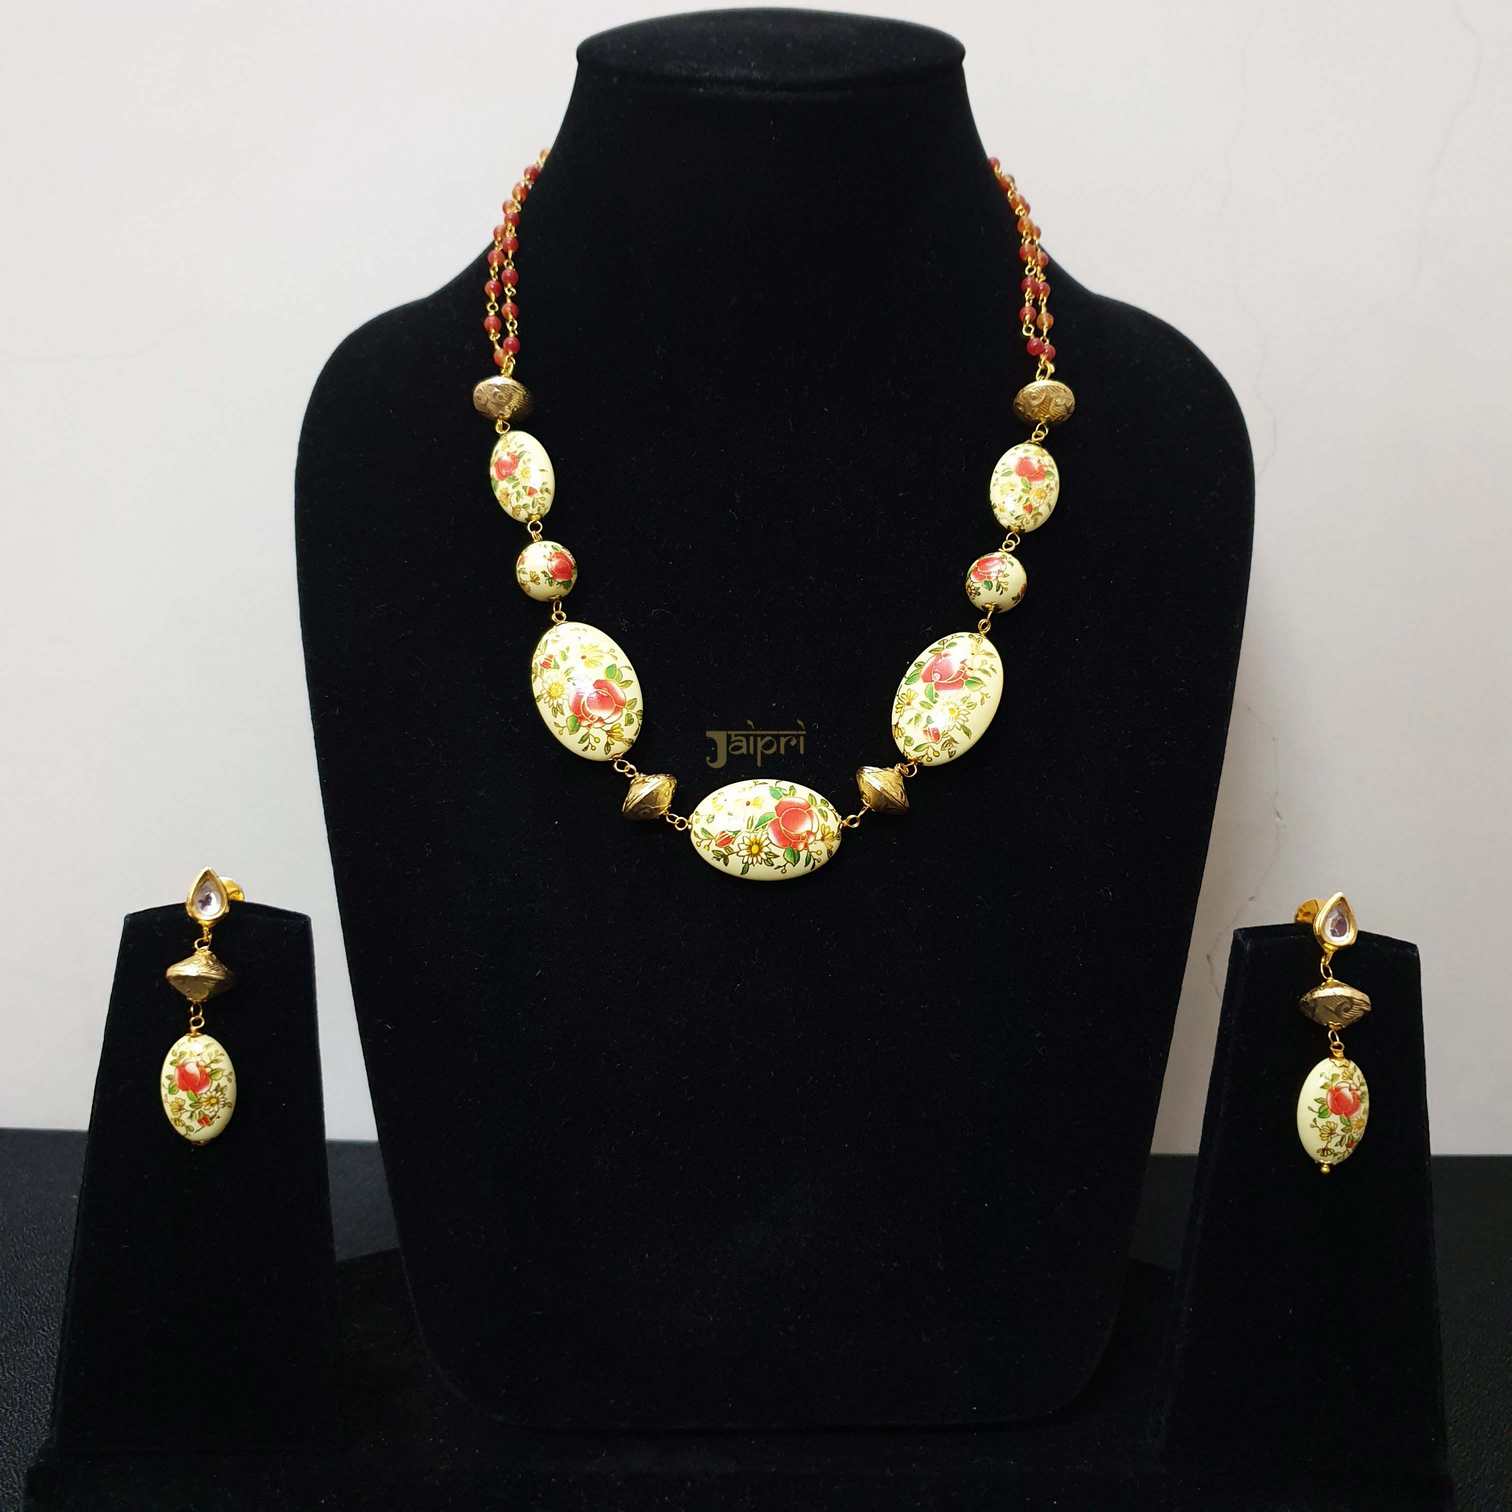 Designer Floral Meenakari Gold Necklace With Earrings